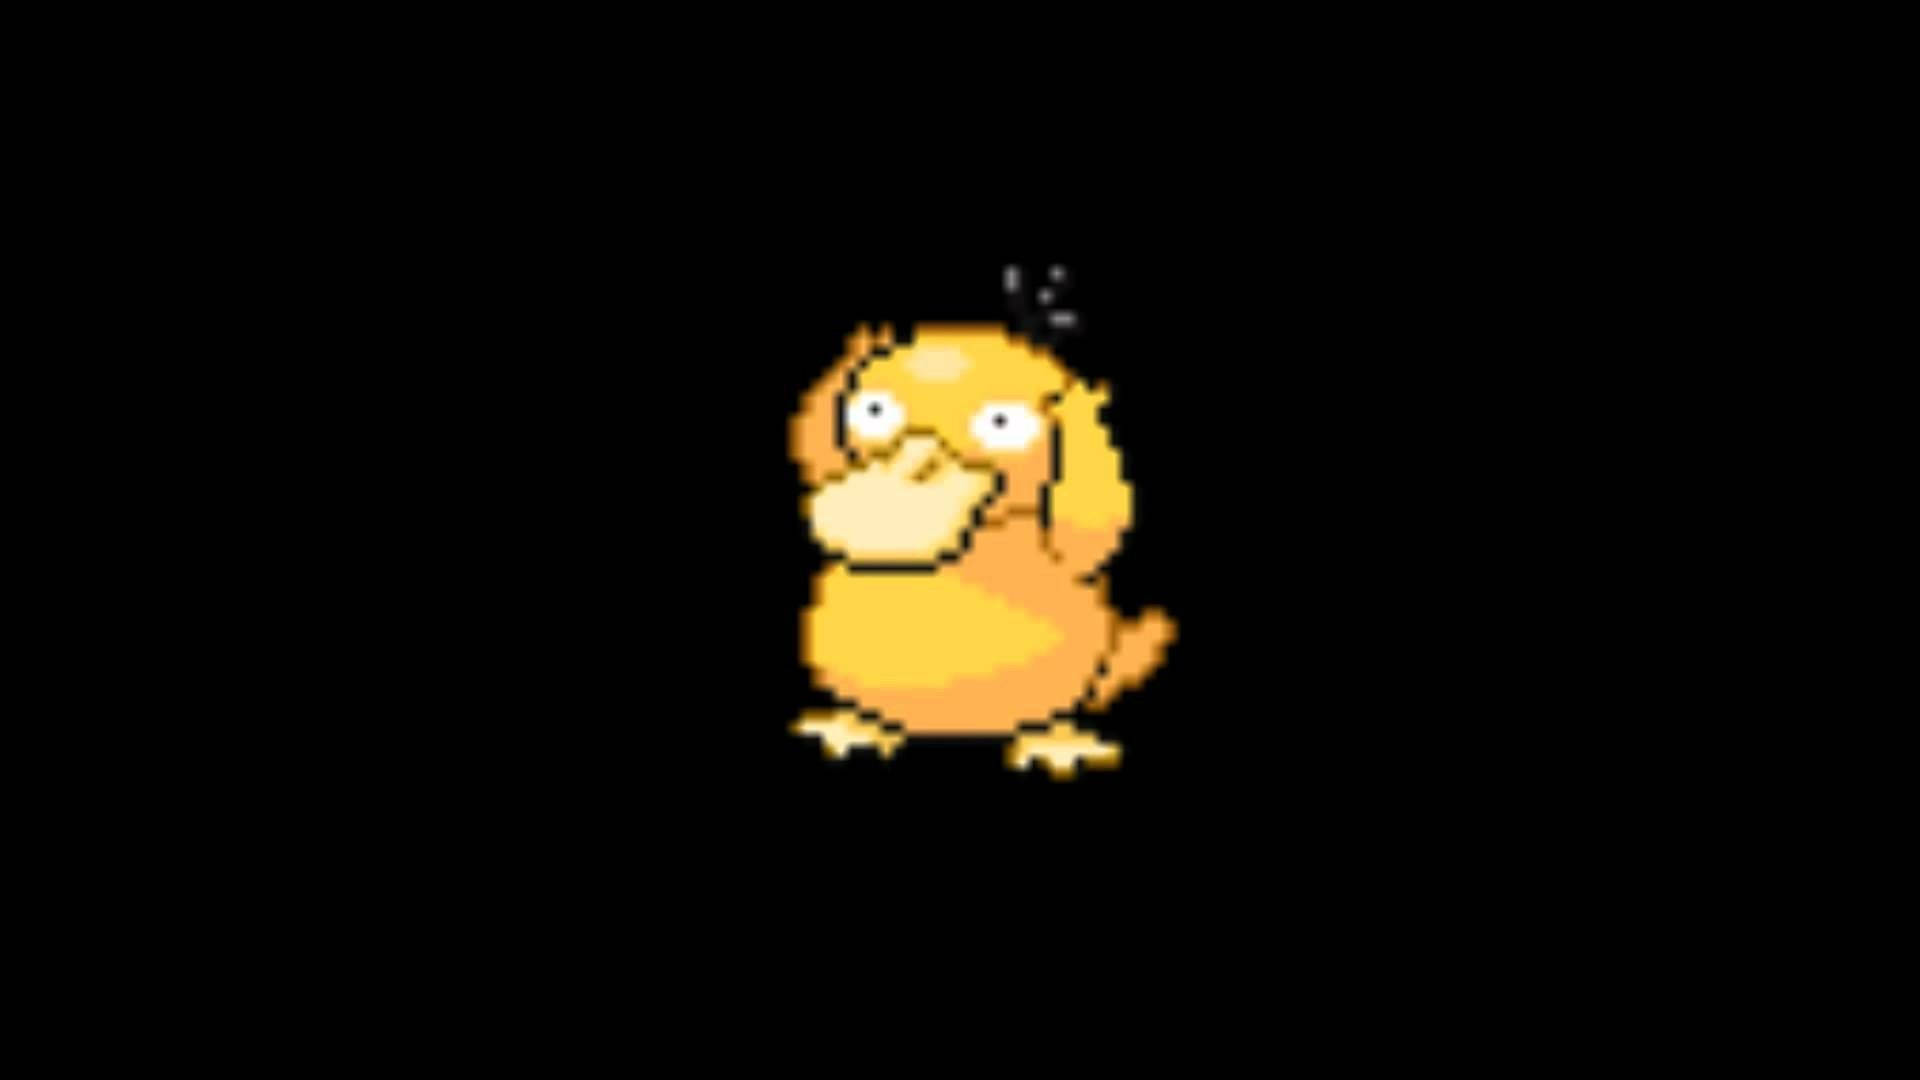 Dive into adventure with Psyduck! Wallpaper